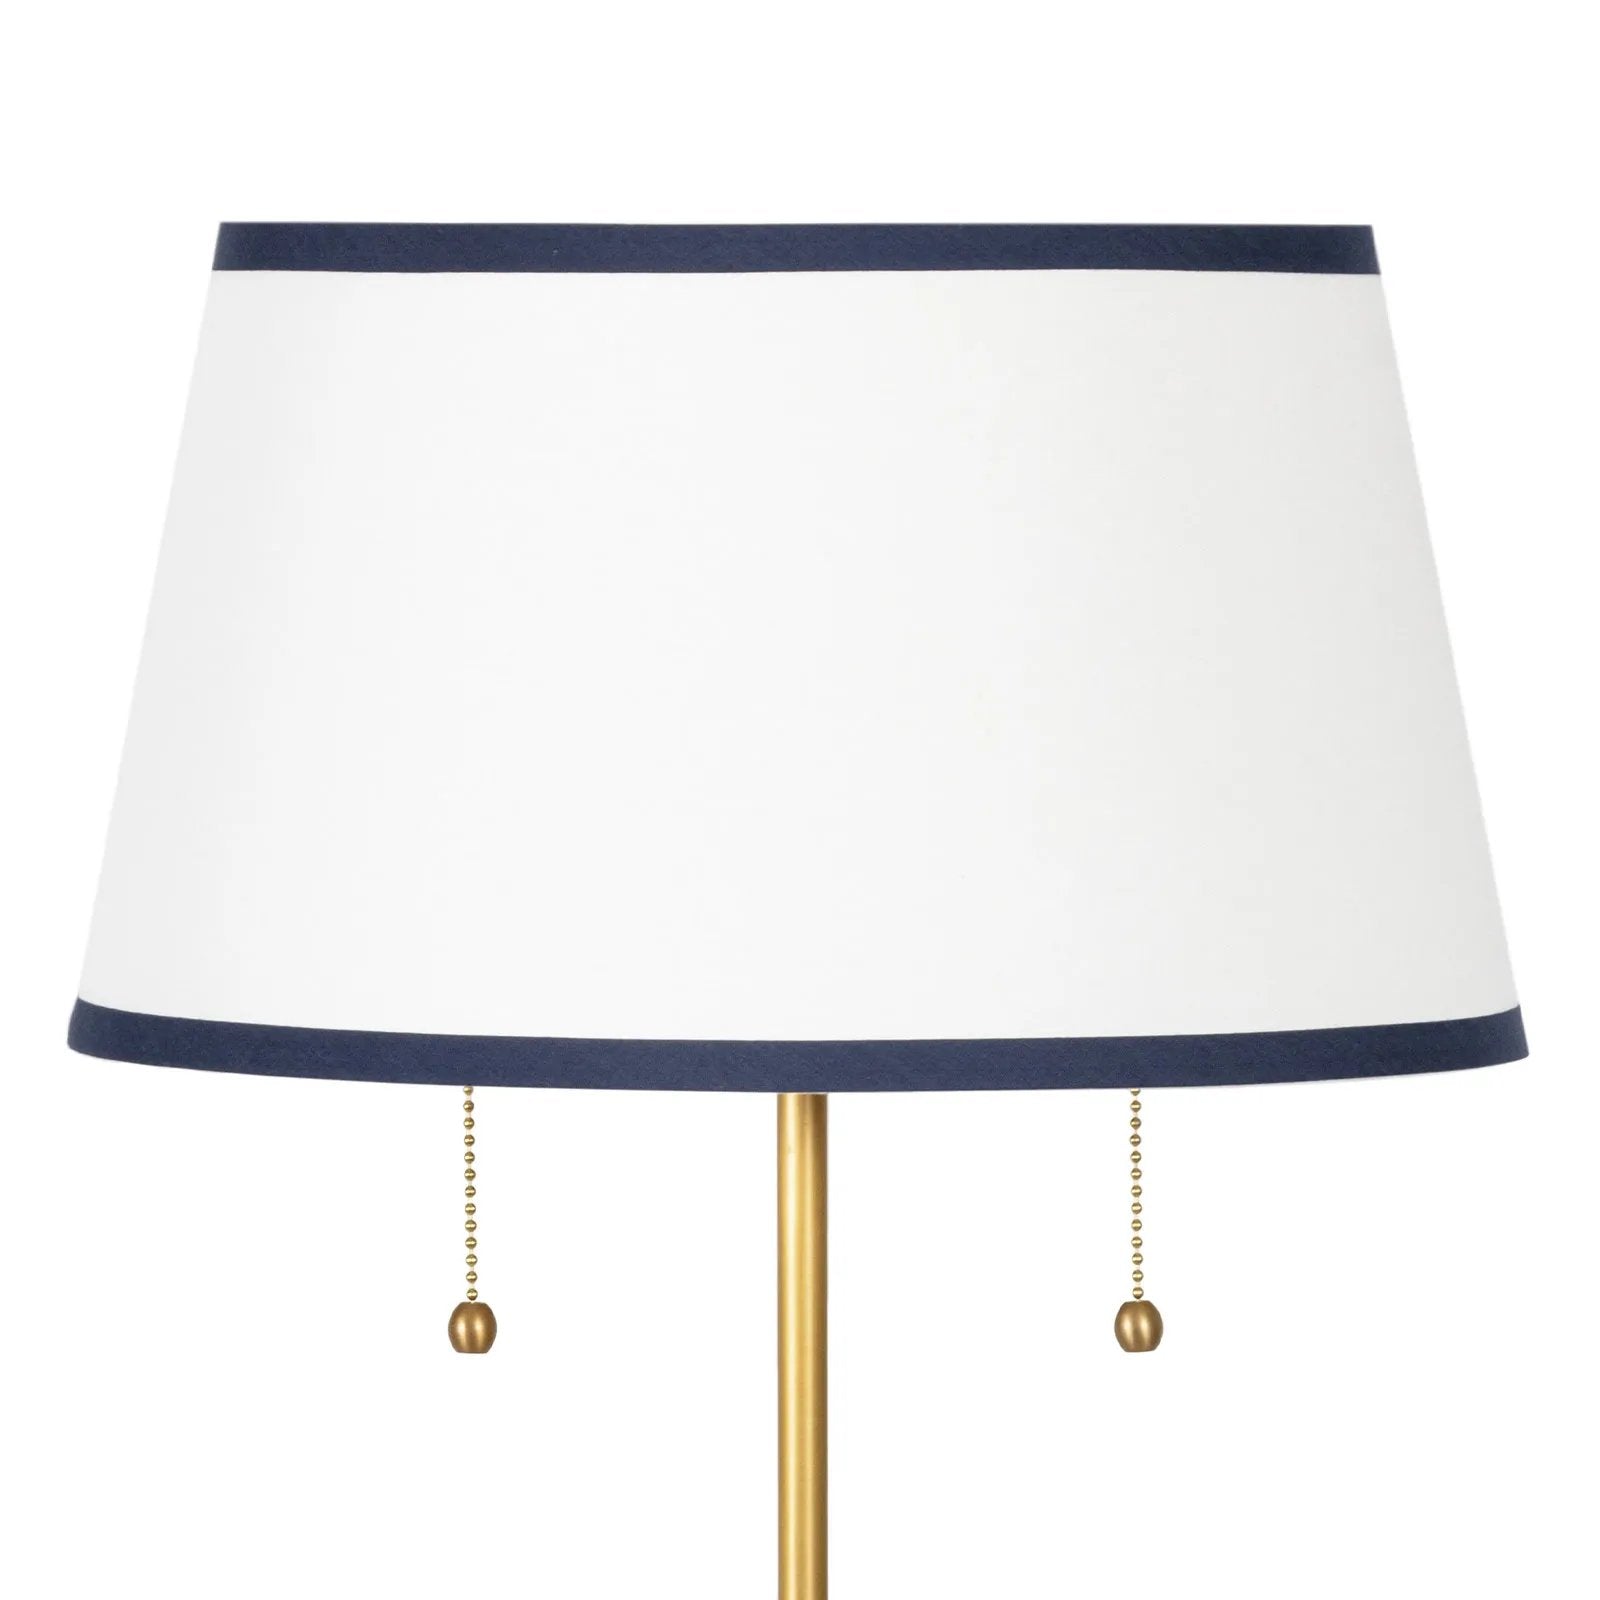 The Daisy Table Lamp is an updated classic with fine details such as its namesake daisy-shaped natural brass base and custom empire shade with navy trim. A part of our Southern Living Lighting Collection, the Daisy is an elegant addition to a dining room, living room or bedroom. Amethyst Home provides interior design, new home construction design consulting, vintage area rugs, and lighting in the Alpharetta metro area.